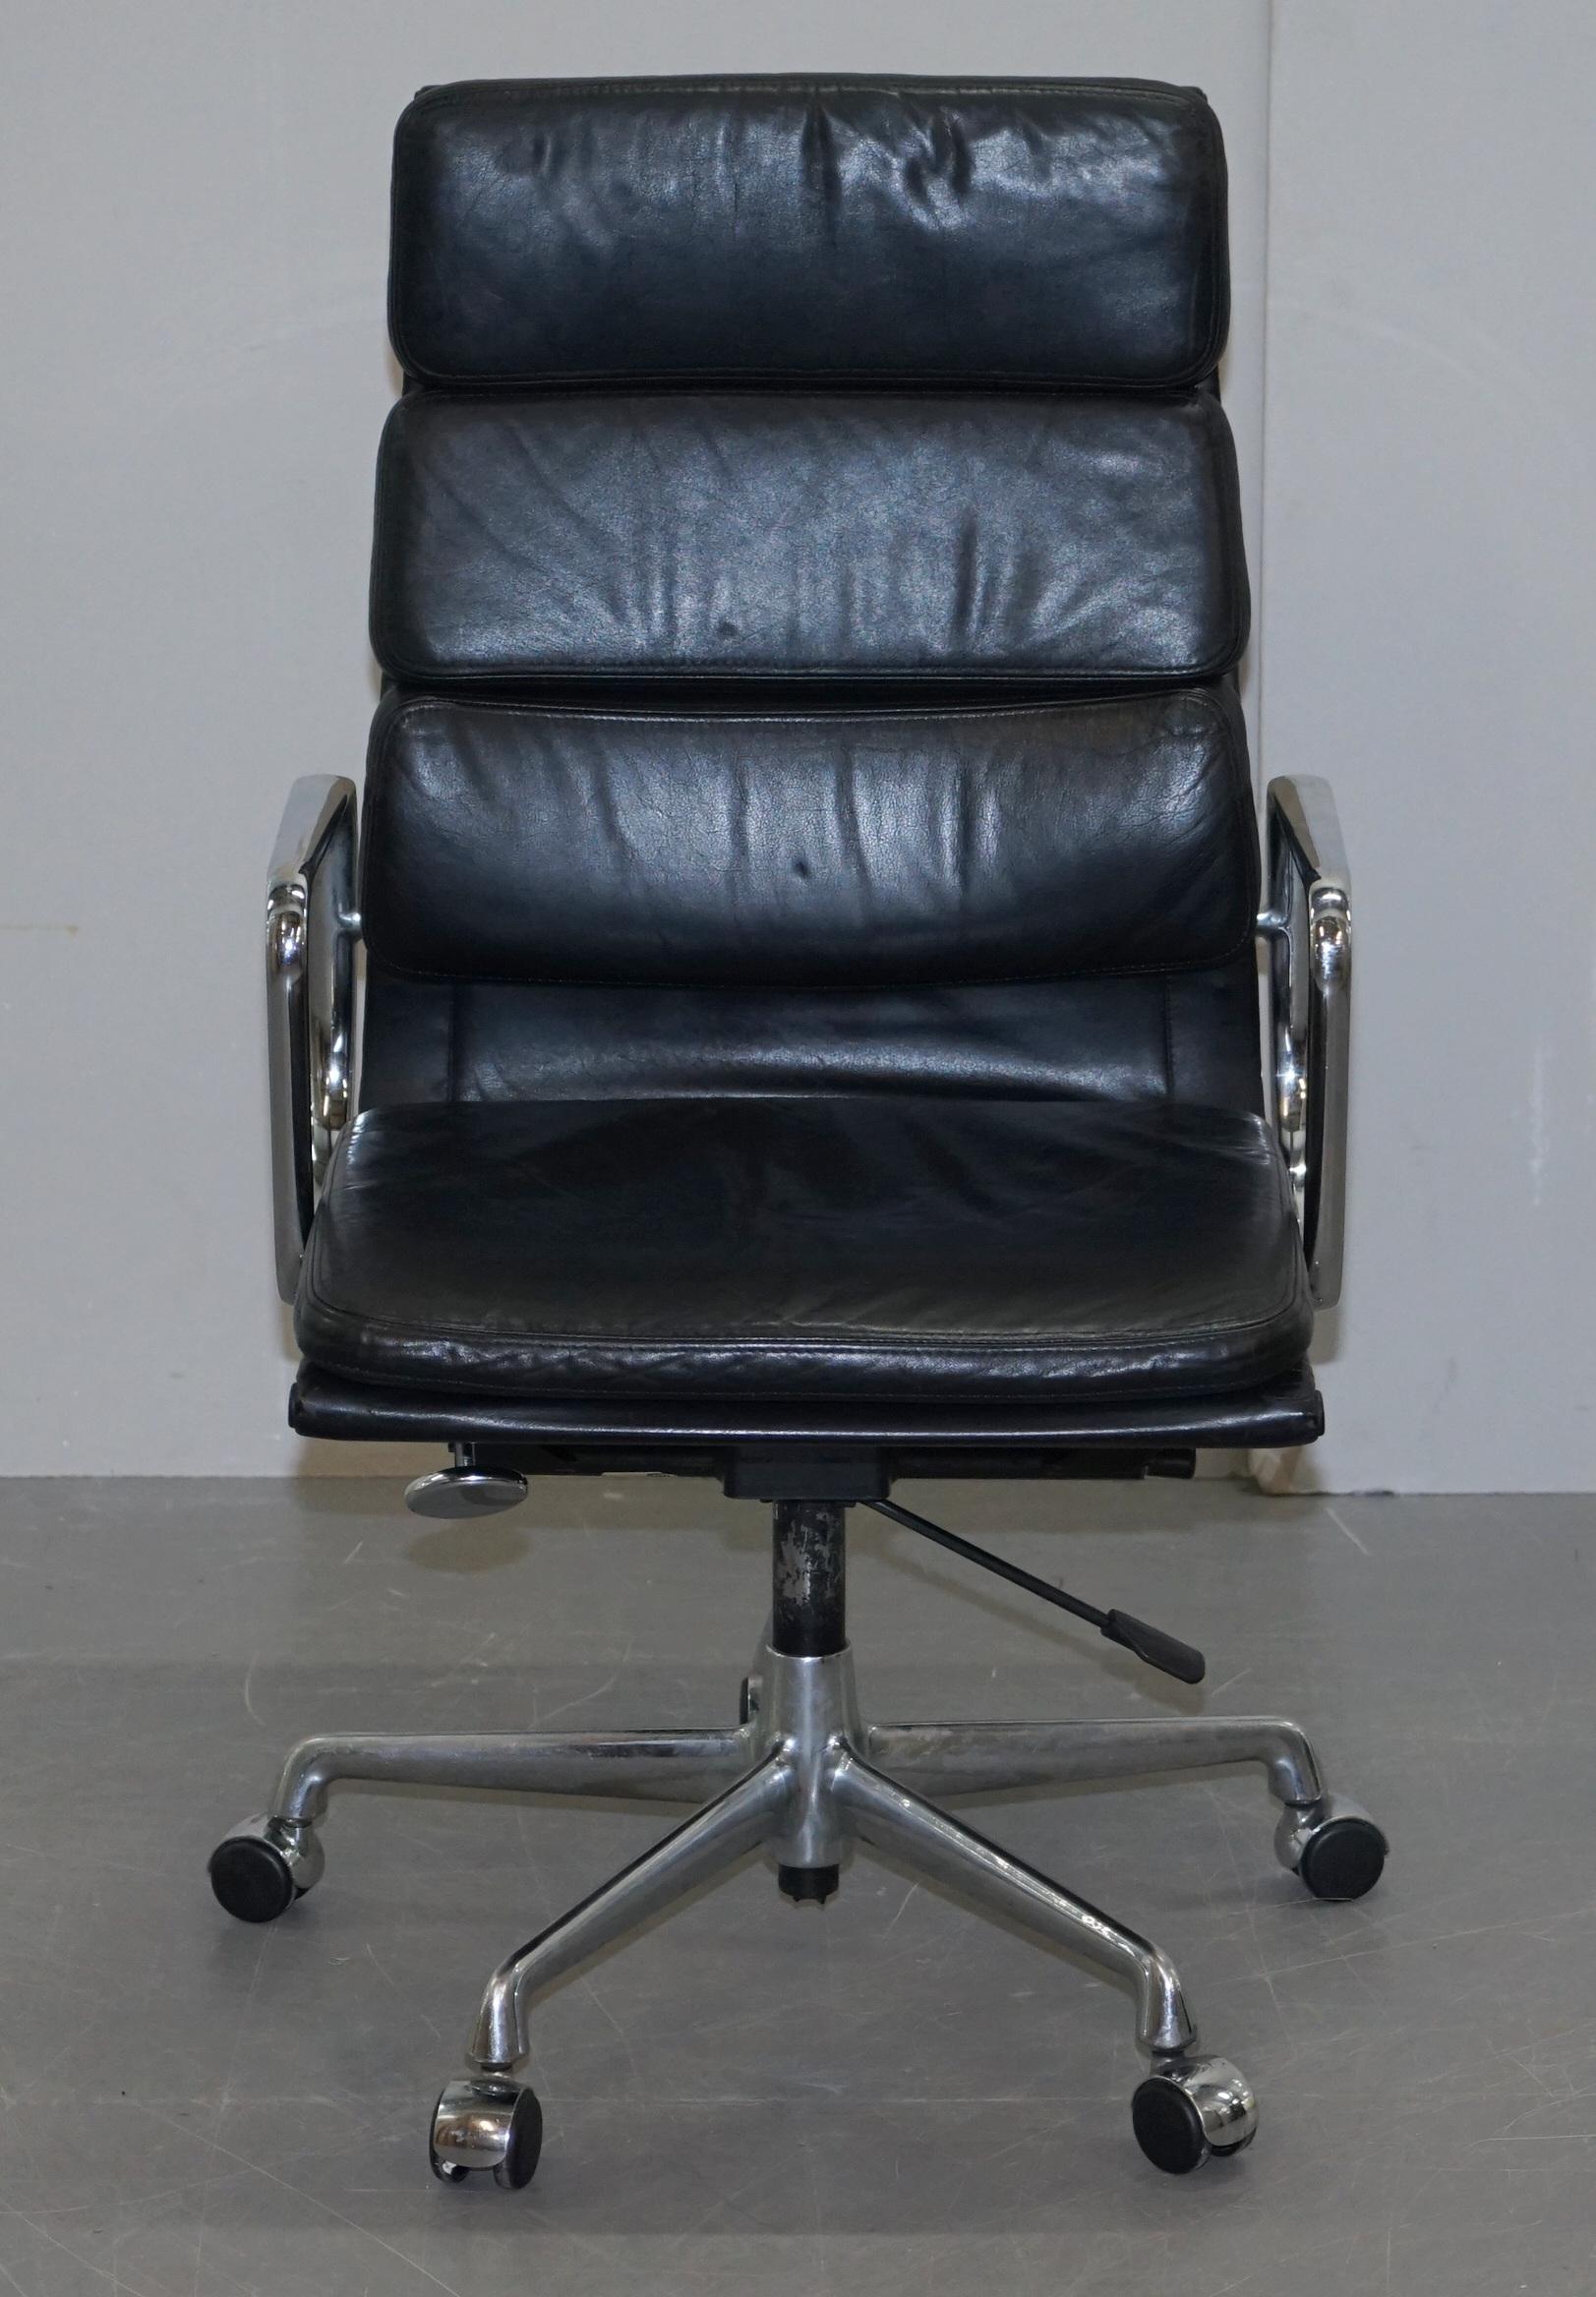 We are delighted to offer for sale this very comfortable Charles Eames retailed through Vitra fully stamped RRP £3620 high back soft pad office chair with chrome swivel base

Pretty much one of the most iconic chairs ever made, the history,